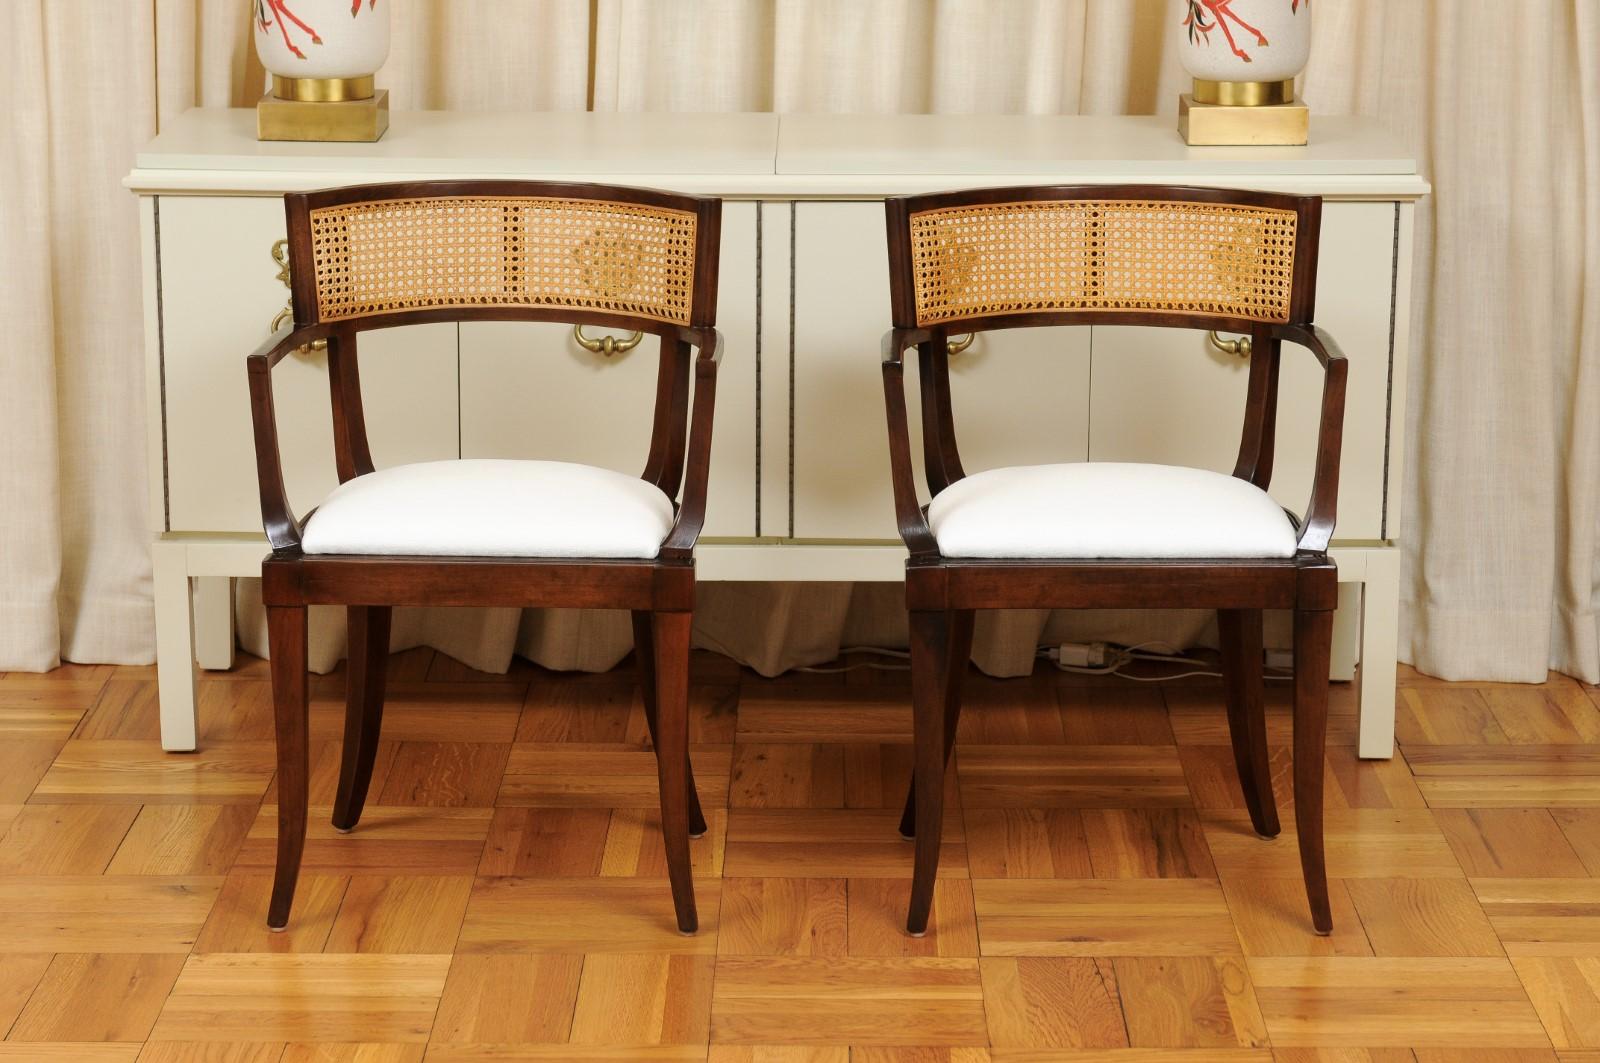 These magnificent dining chairs are shipped as professionally photographed and described in the listing narrative, completely installation ready. This large All Arm set of difficult to find examples is unique on the market. Seats may be caned if